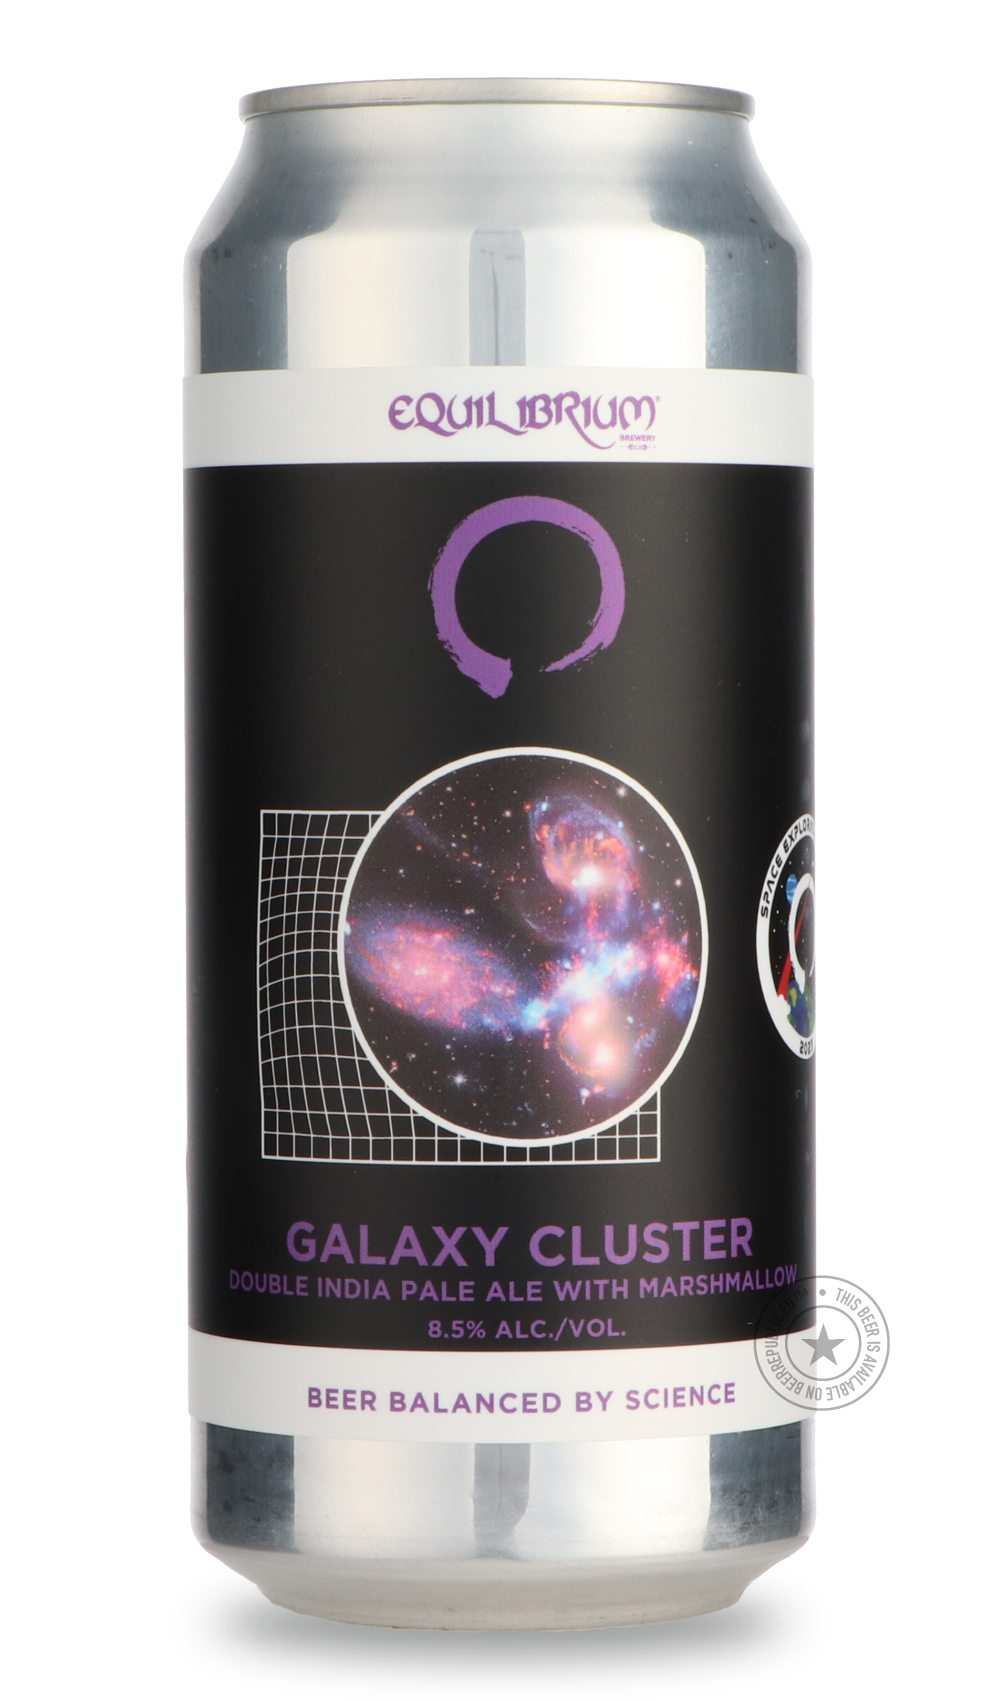 -Equilibrium- Galaxy Cluster-IPA- Only @ Beer Republic - The best online beer store for American & Canadian craft beer - Buy beer online from the USA and Canada - Bier online kopen - Amerikaans bier kopen - Craft beer store - Craft beer kopen - Amerikanisch bier kaufen - Bier online kaufen - Acheter biere online - IPA - Stout - Porter - New England IPA - Hazy IPA - Imperial Stout - Barrel Aged - Barrel Aged Imperial Stout - Brown - Dark beer - Blond - Blonde - Pilsner - Lager - Wheat - Weizen - Amber - Barl